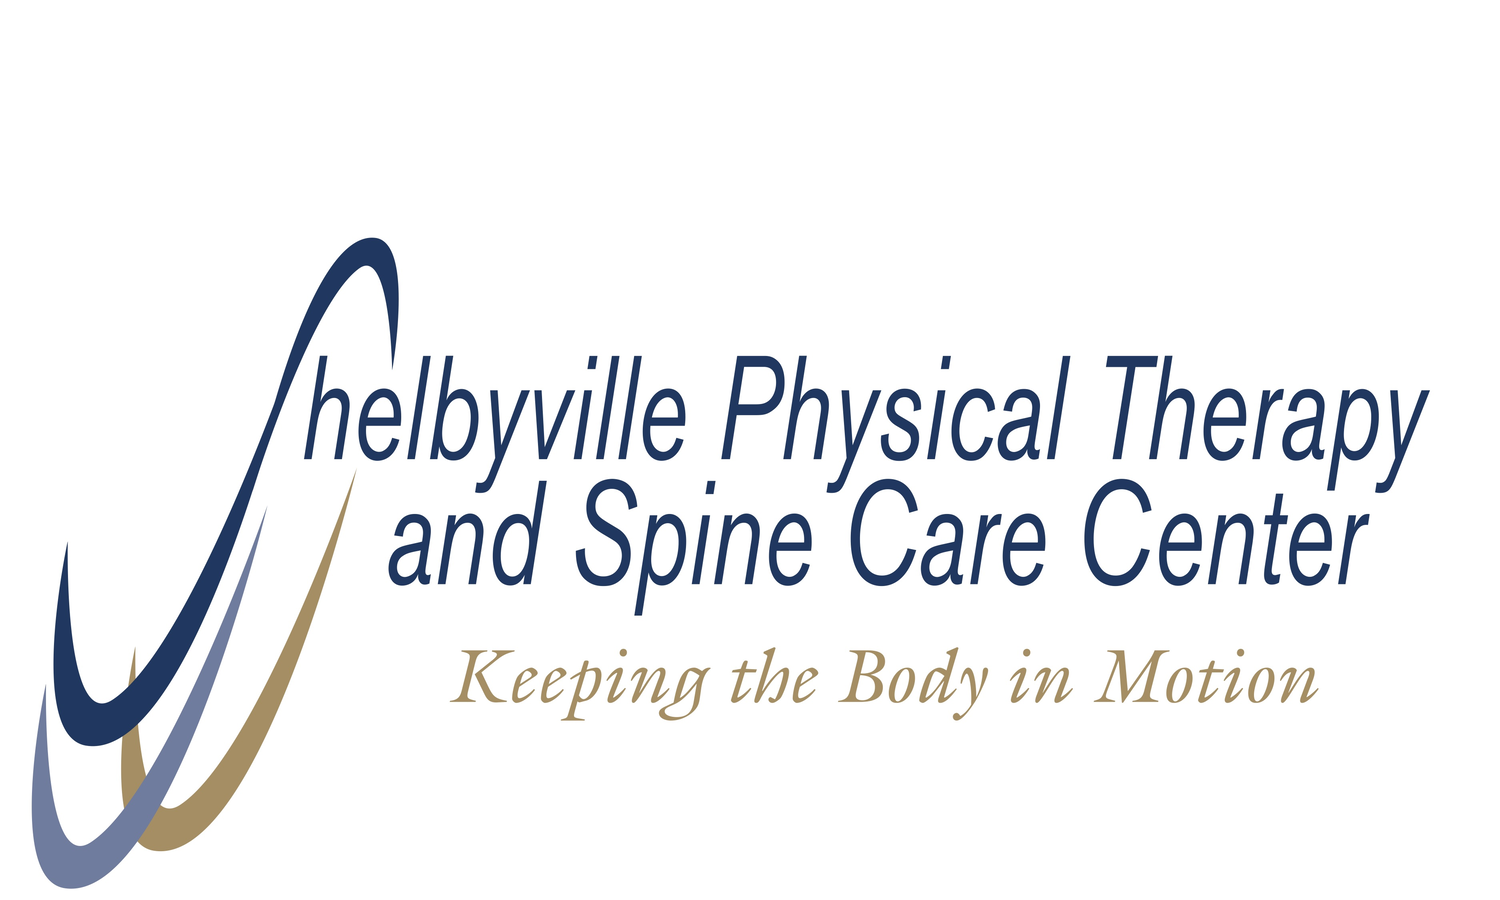 Shelbyville Physical Therapy & Spine Care Center